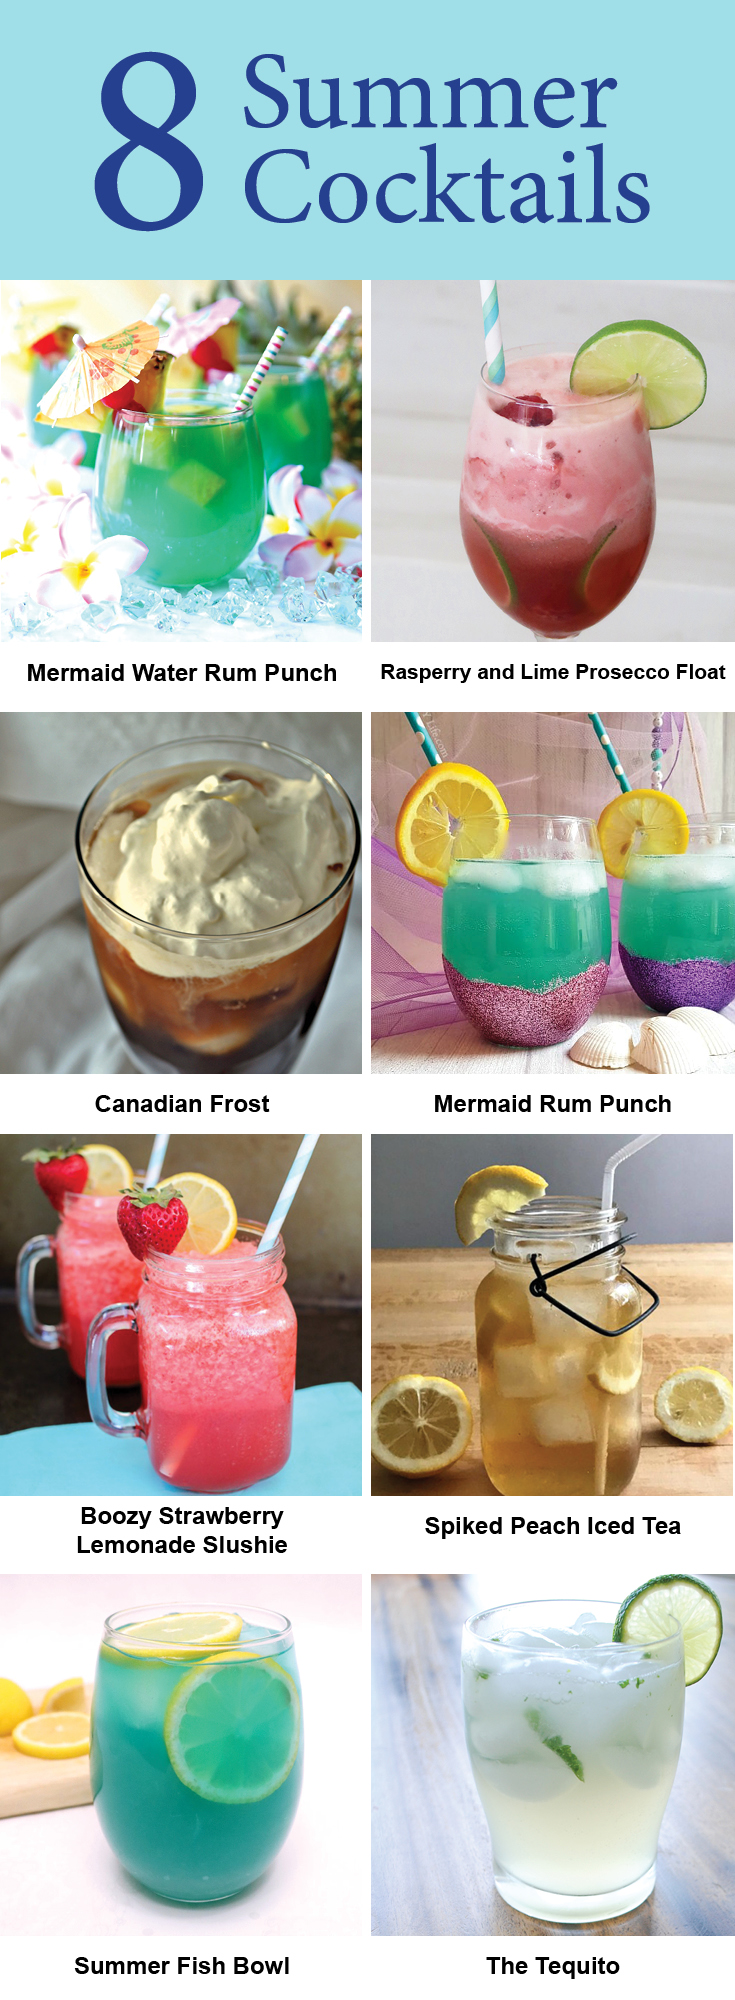 A delicious and fabulous collection of Summer Cocktails. Must-Make Summer Cocktails!